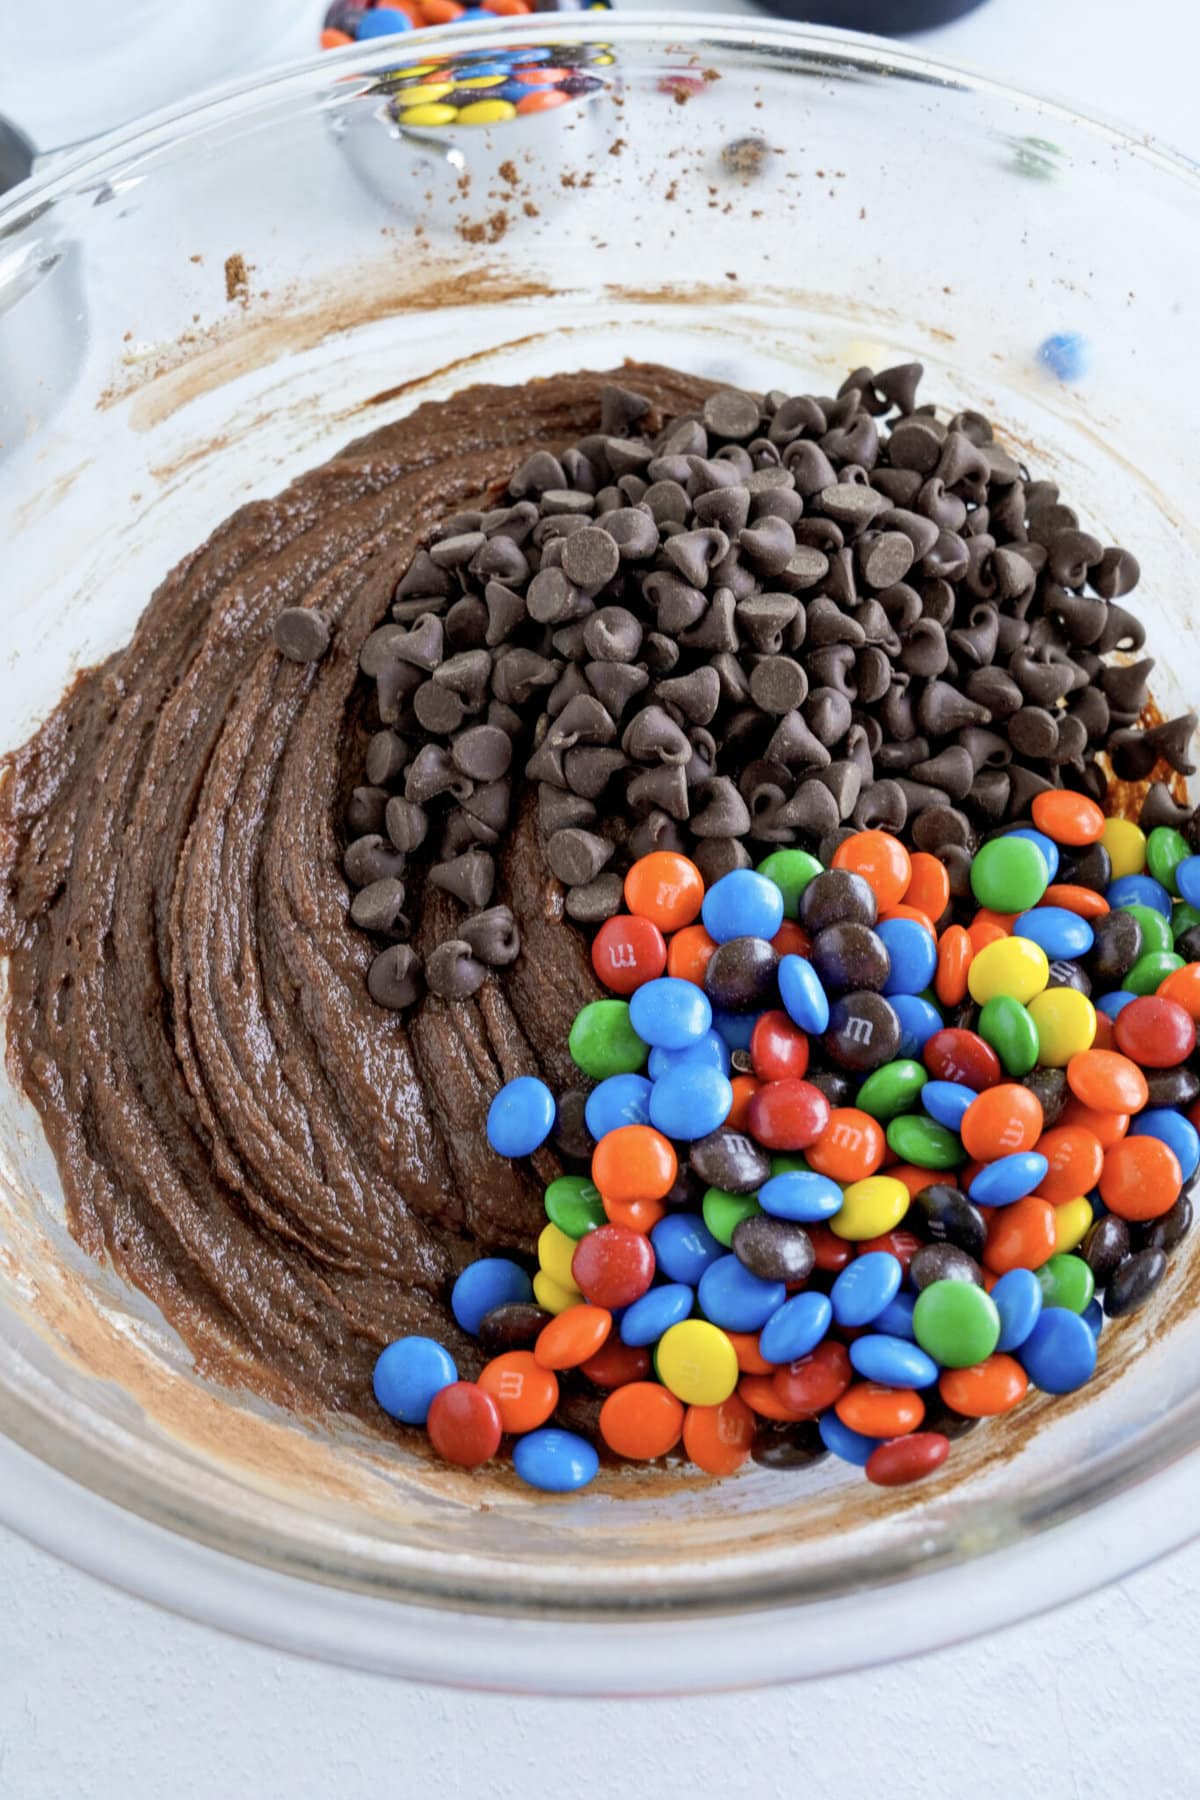 Adding the chocolate chips and M&M's.